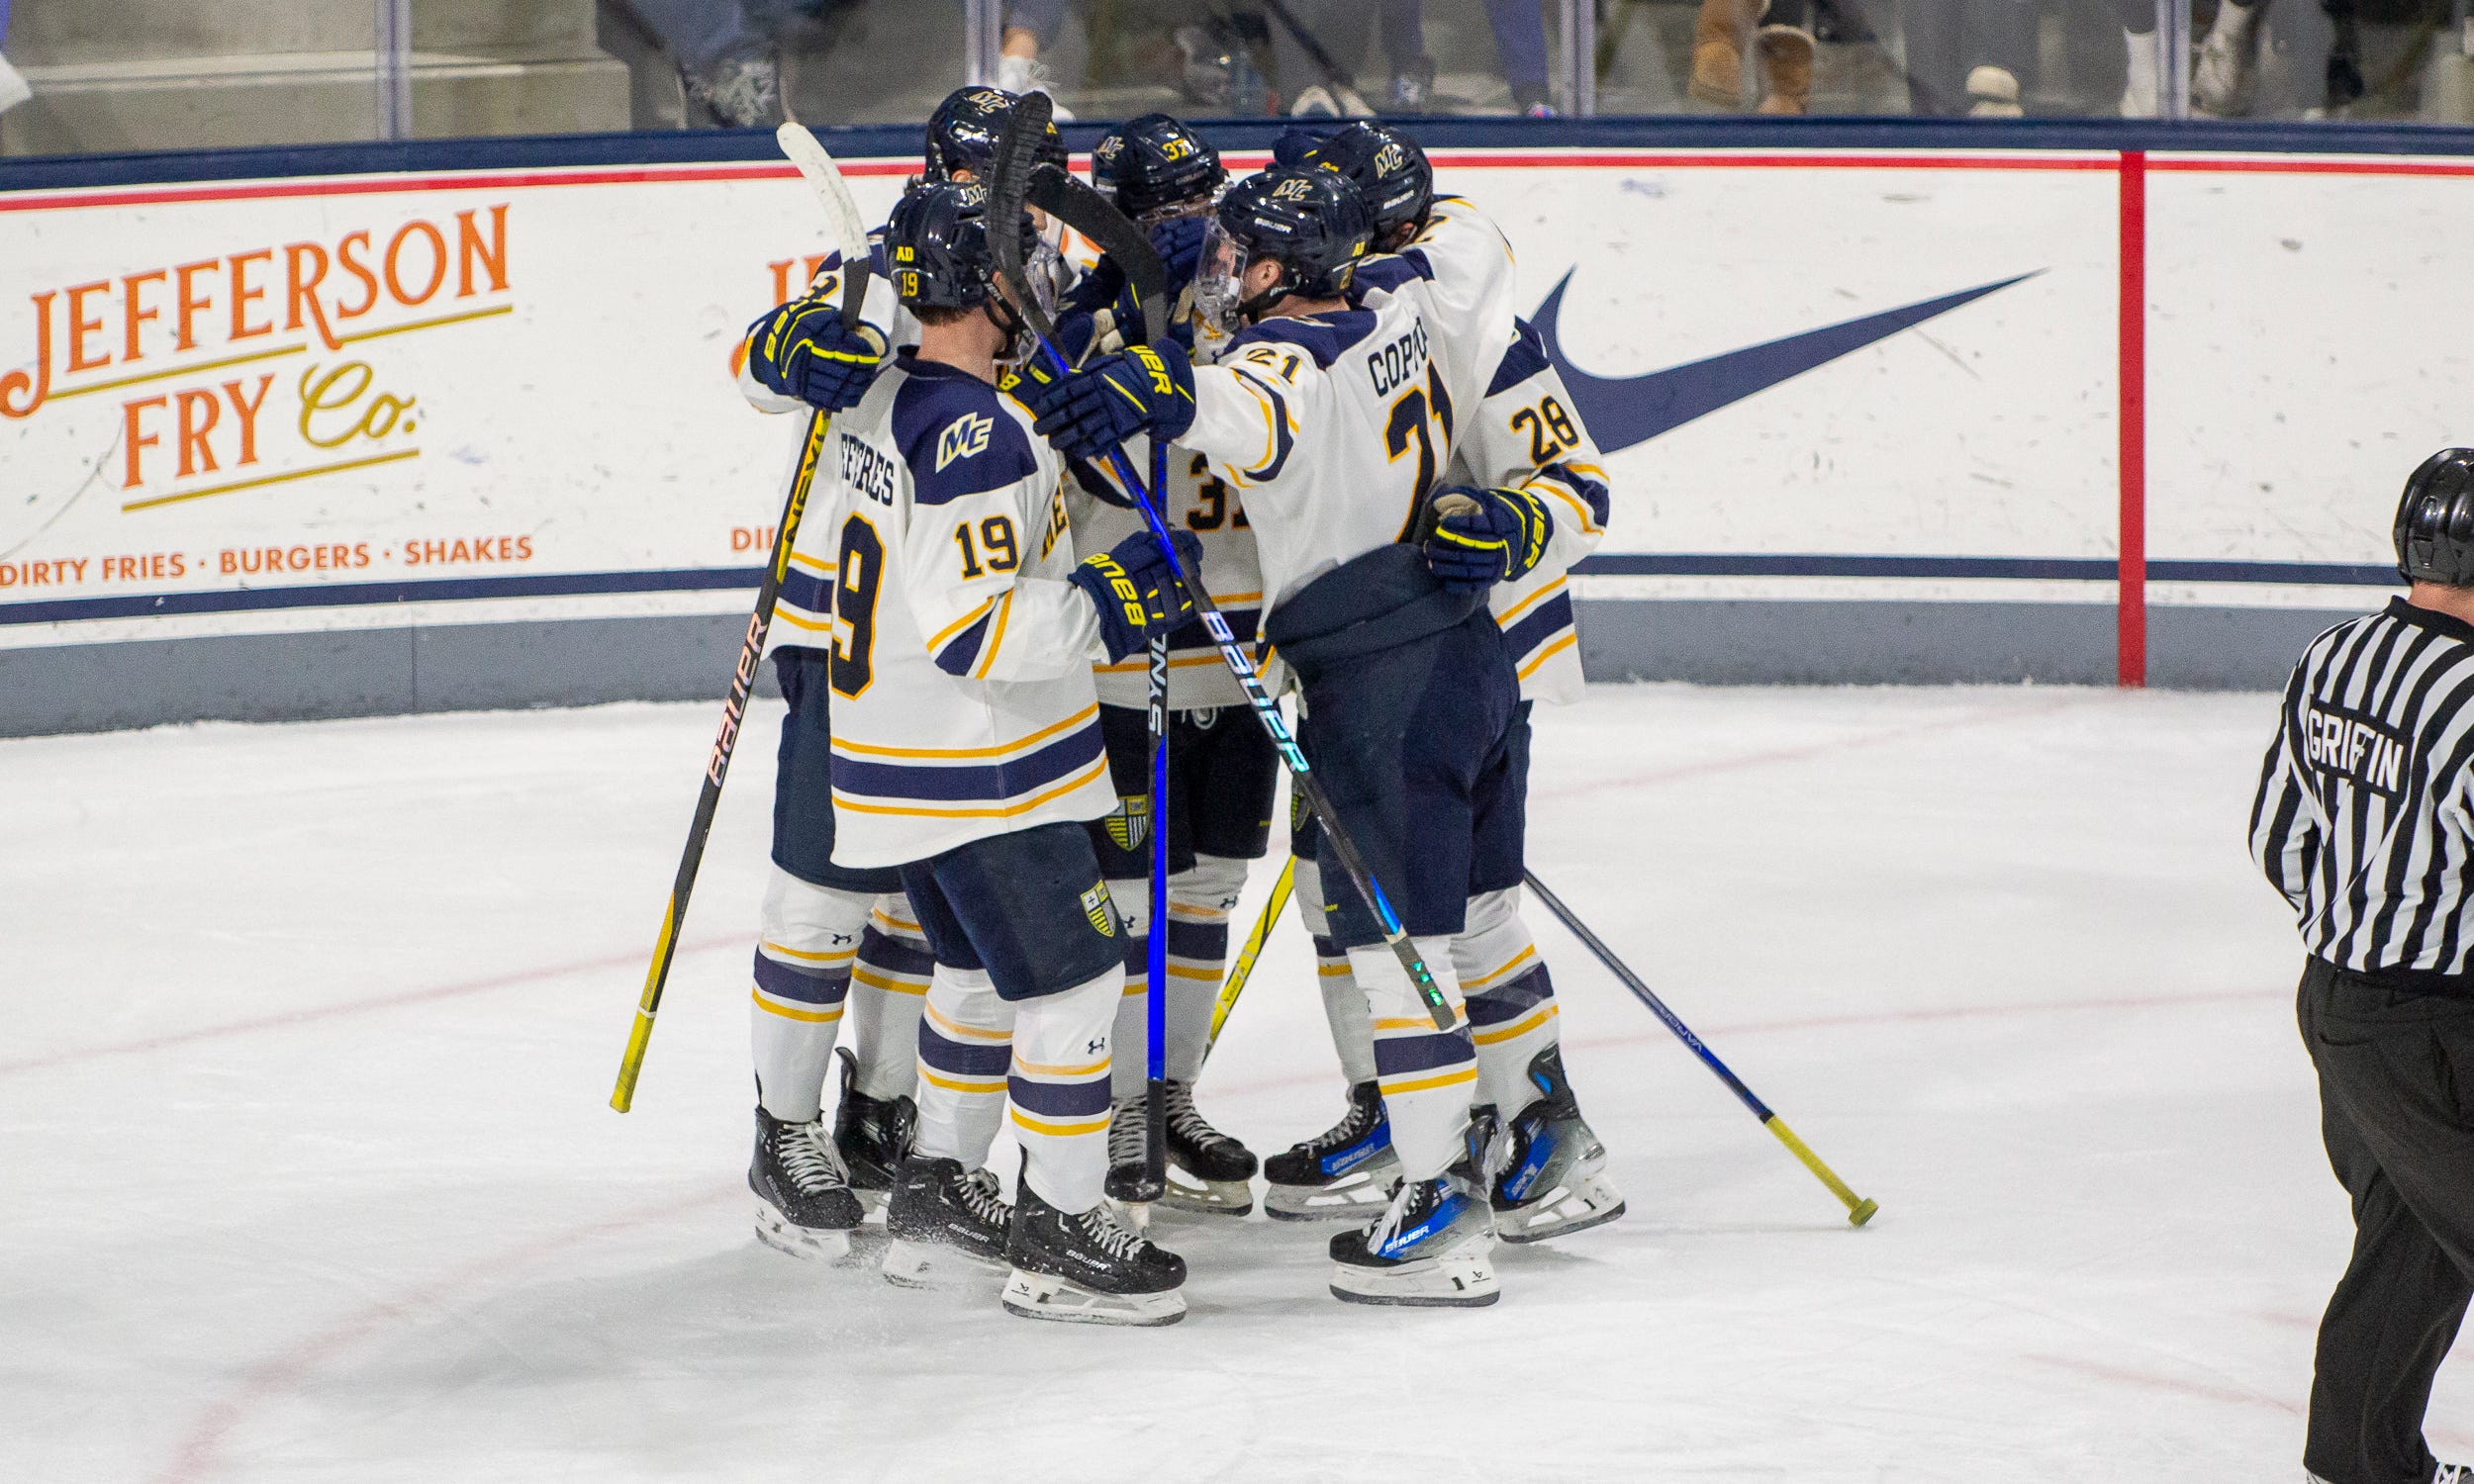 Reuniting with Copponi, Alex Jefferies scores a hat trick for Merrimack in a win over UConn